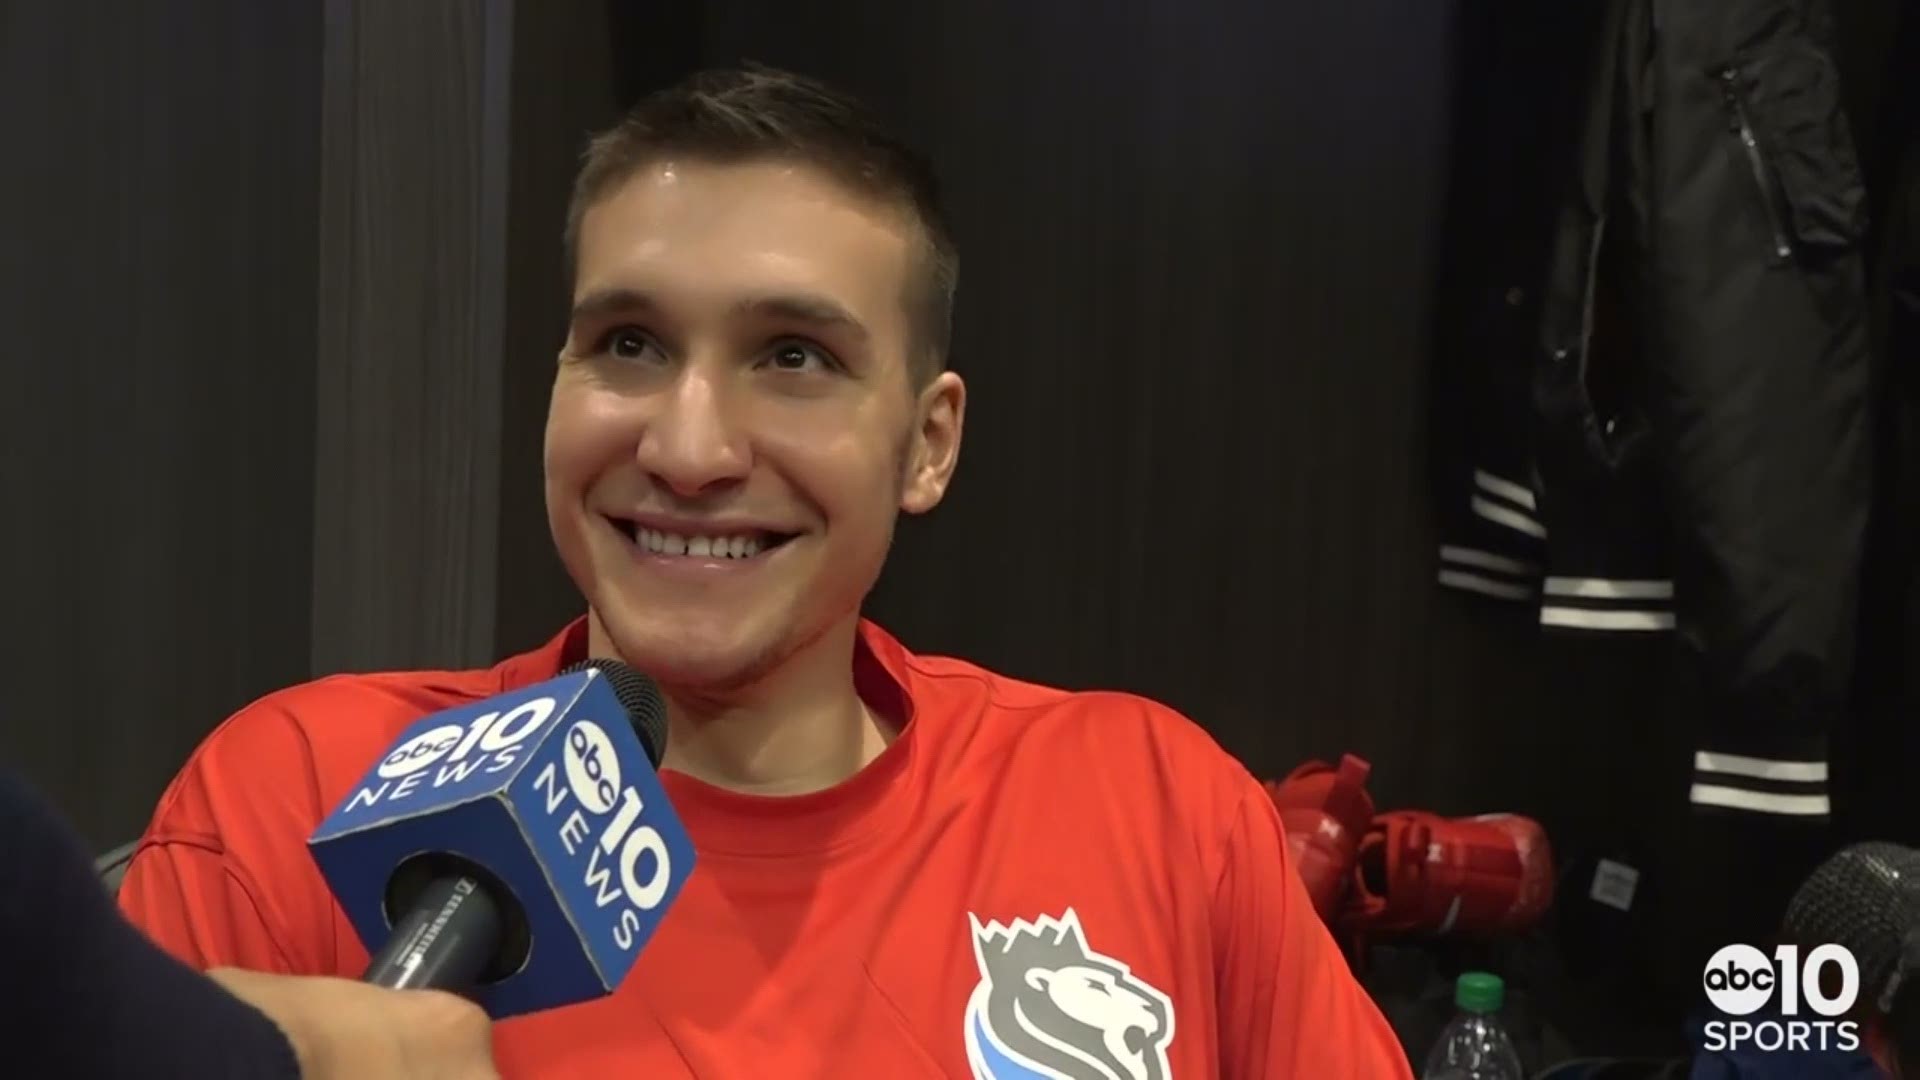 Bogdan Bogdanovic reacts to hitting the game-winning three-point shot for the Sacramento Kings in their 94-93 victory over the Oklahoma City Thunder on Wednesday.